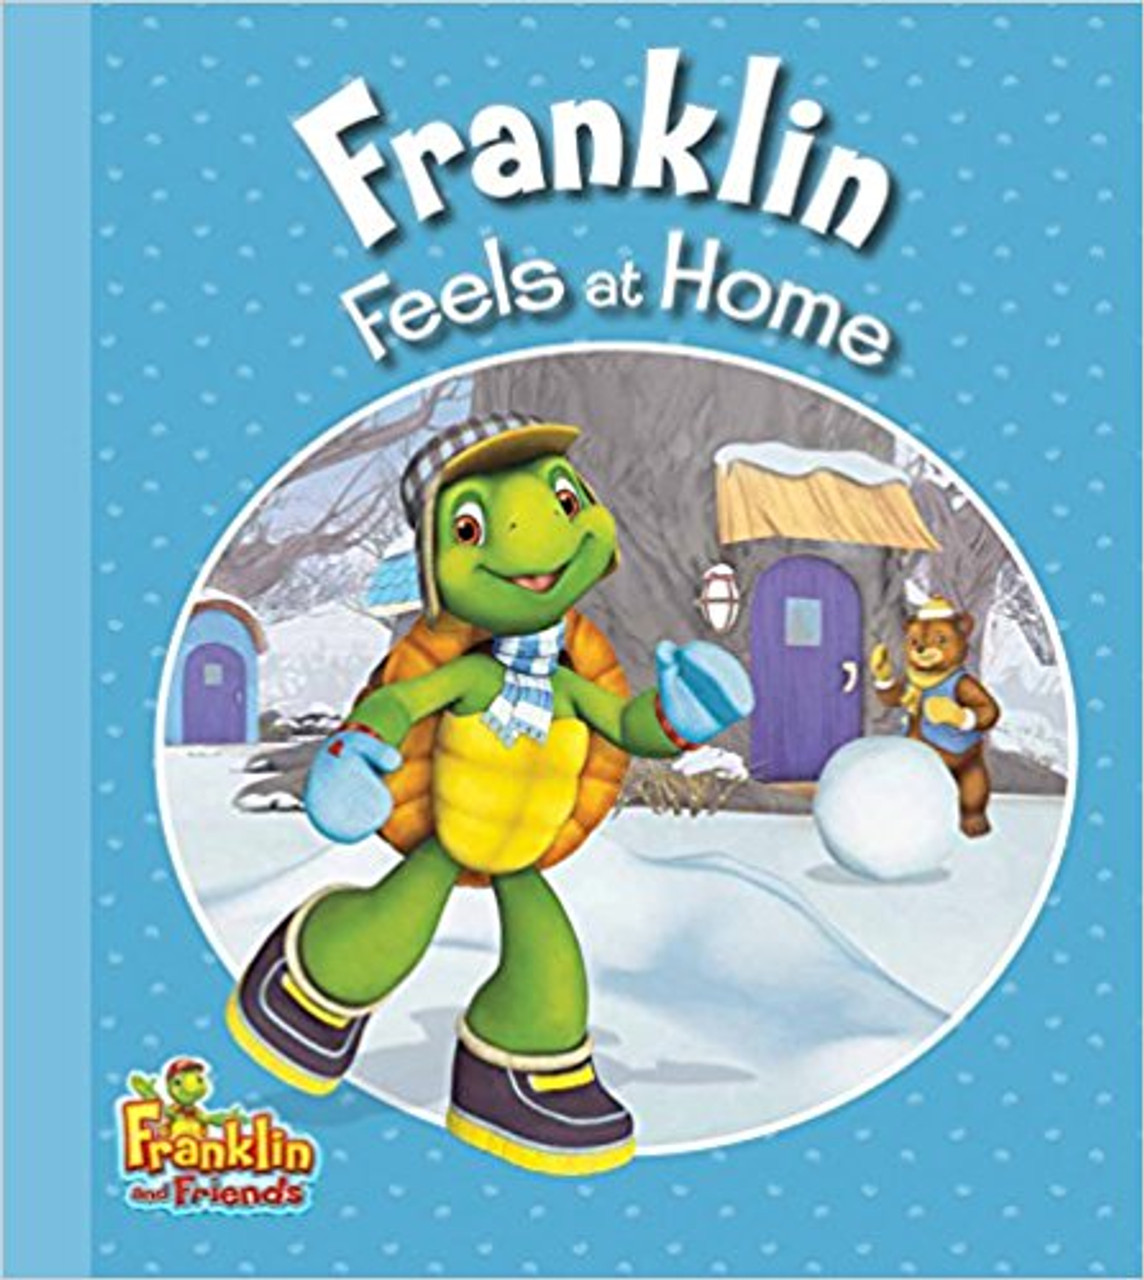 Franklin Feels at Home by Harry Endrulat